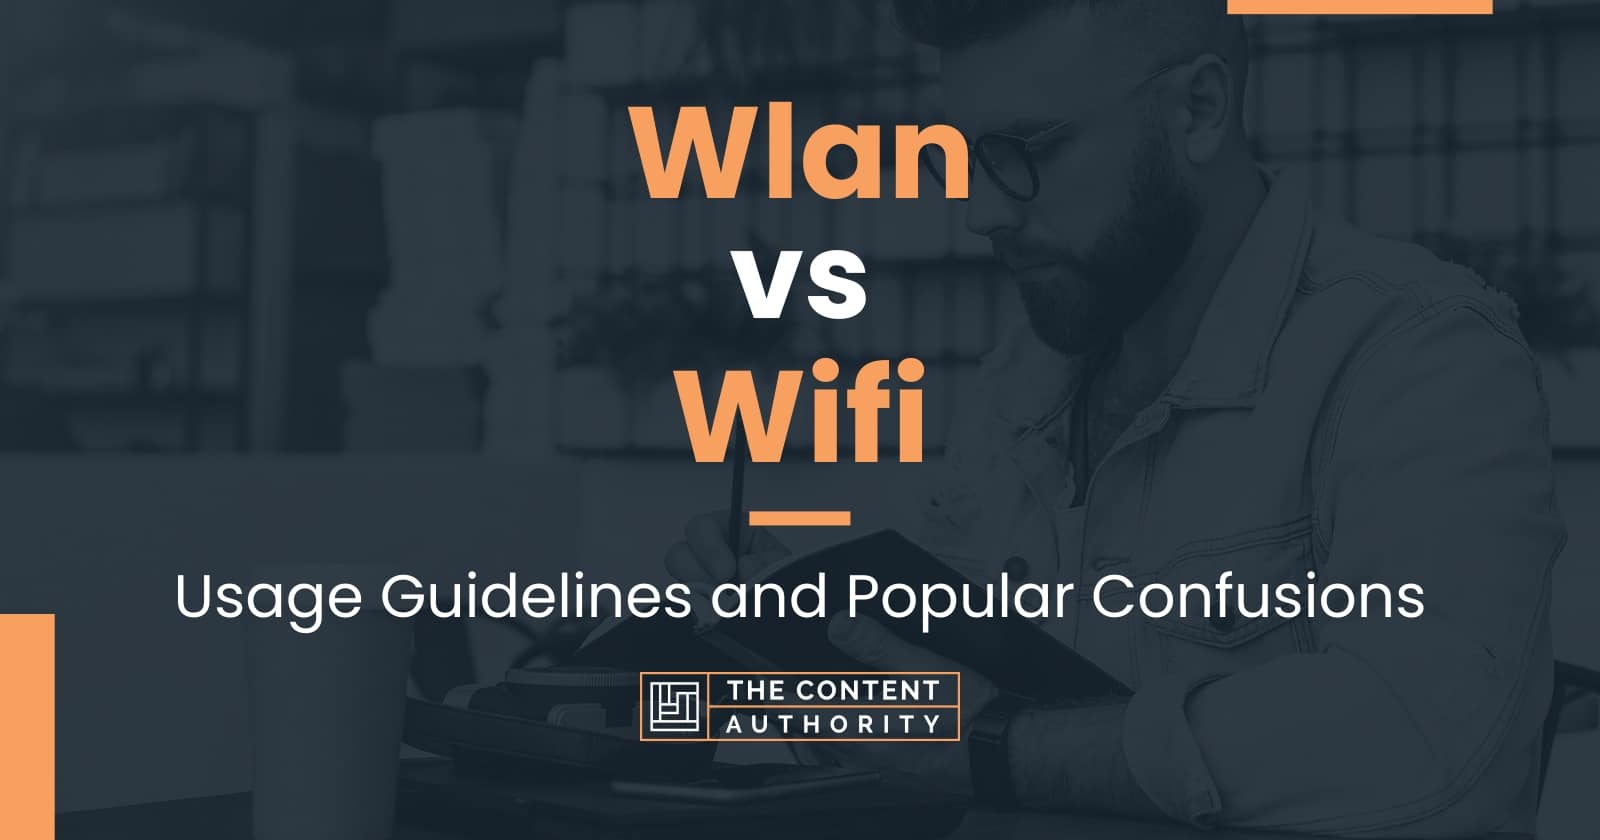 Wlan Vs Wifi Usage Guidelines And Popular Confusions